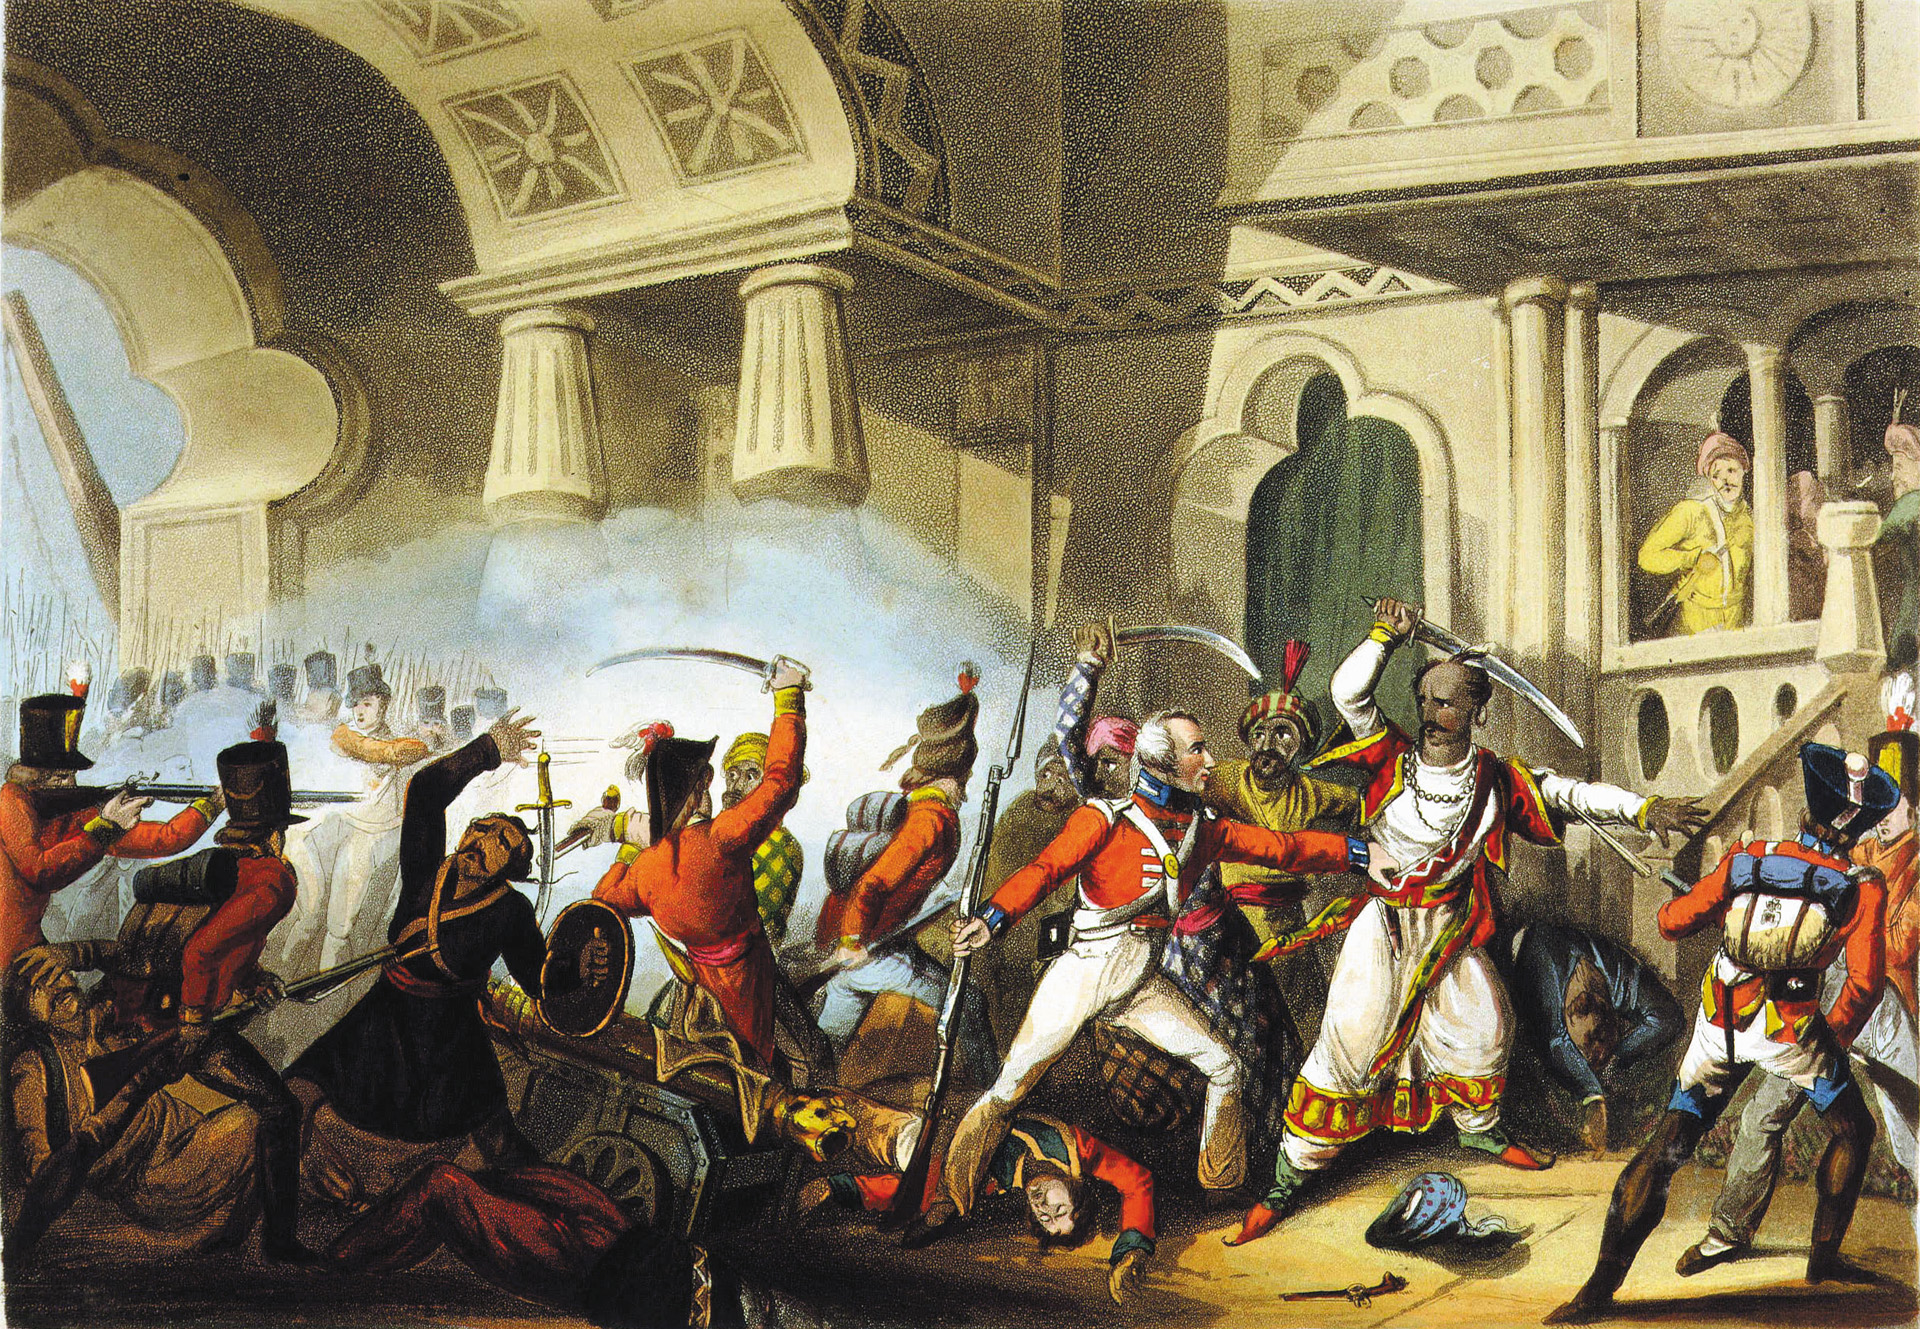 Storming the Seringapatam, a British soldier attacks Sultan Sahib. Despite having already been injured, Sahib would seriously wound his attacker before being fatally shot. 